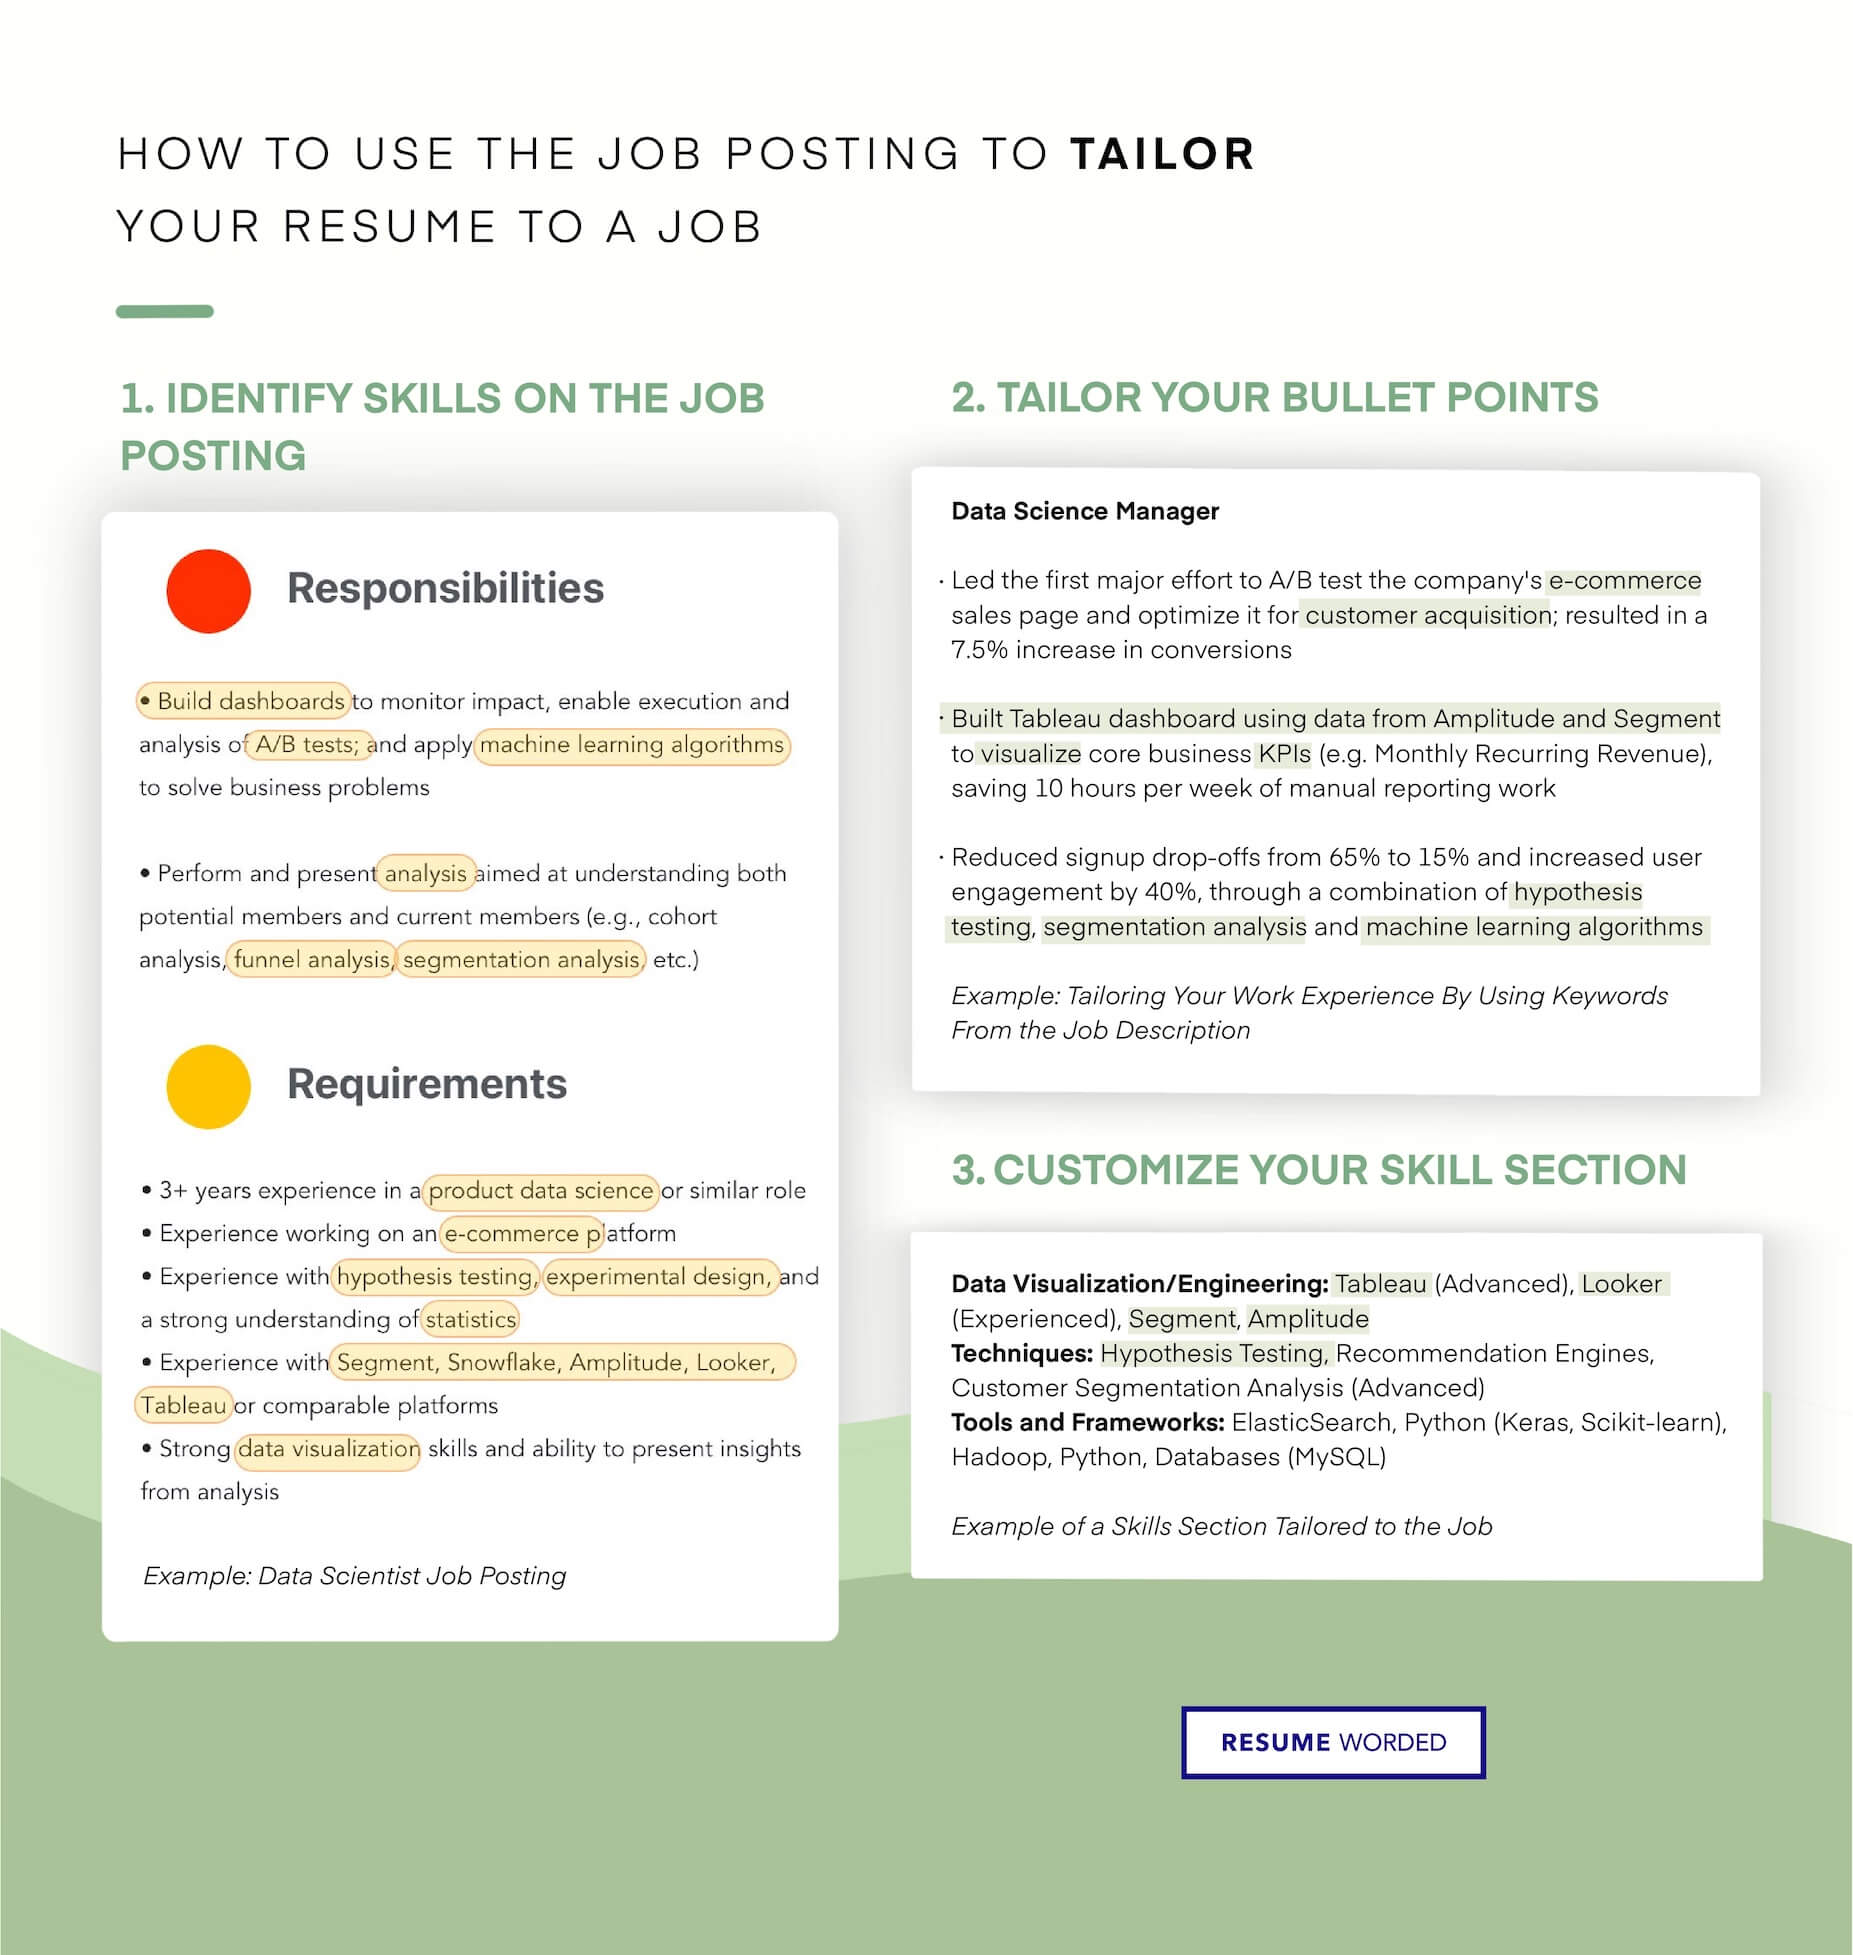 Be sure to tailor your resume to avoid getting rejected from a job